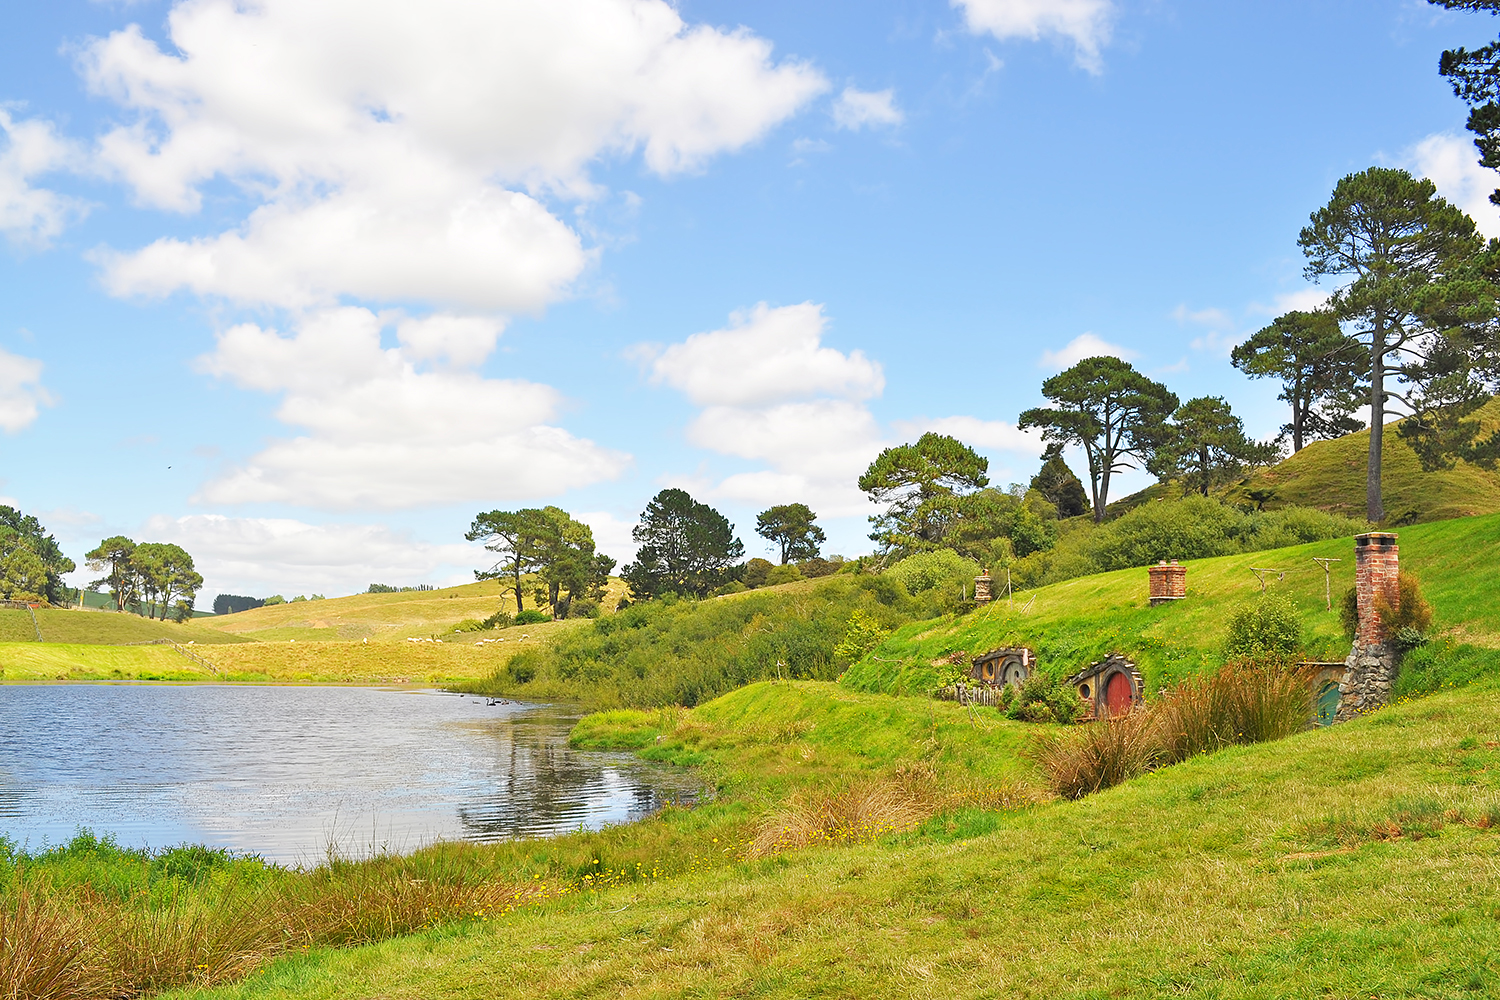 10 famous movie locations you can actually visit lord of the rings new zealand 2